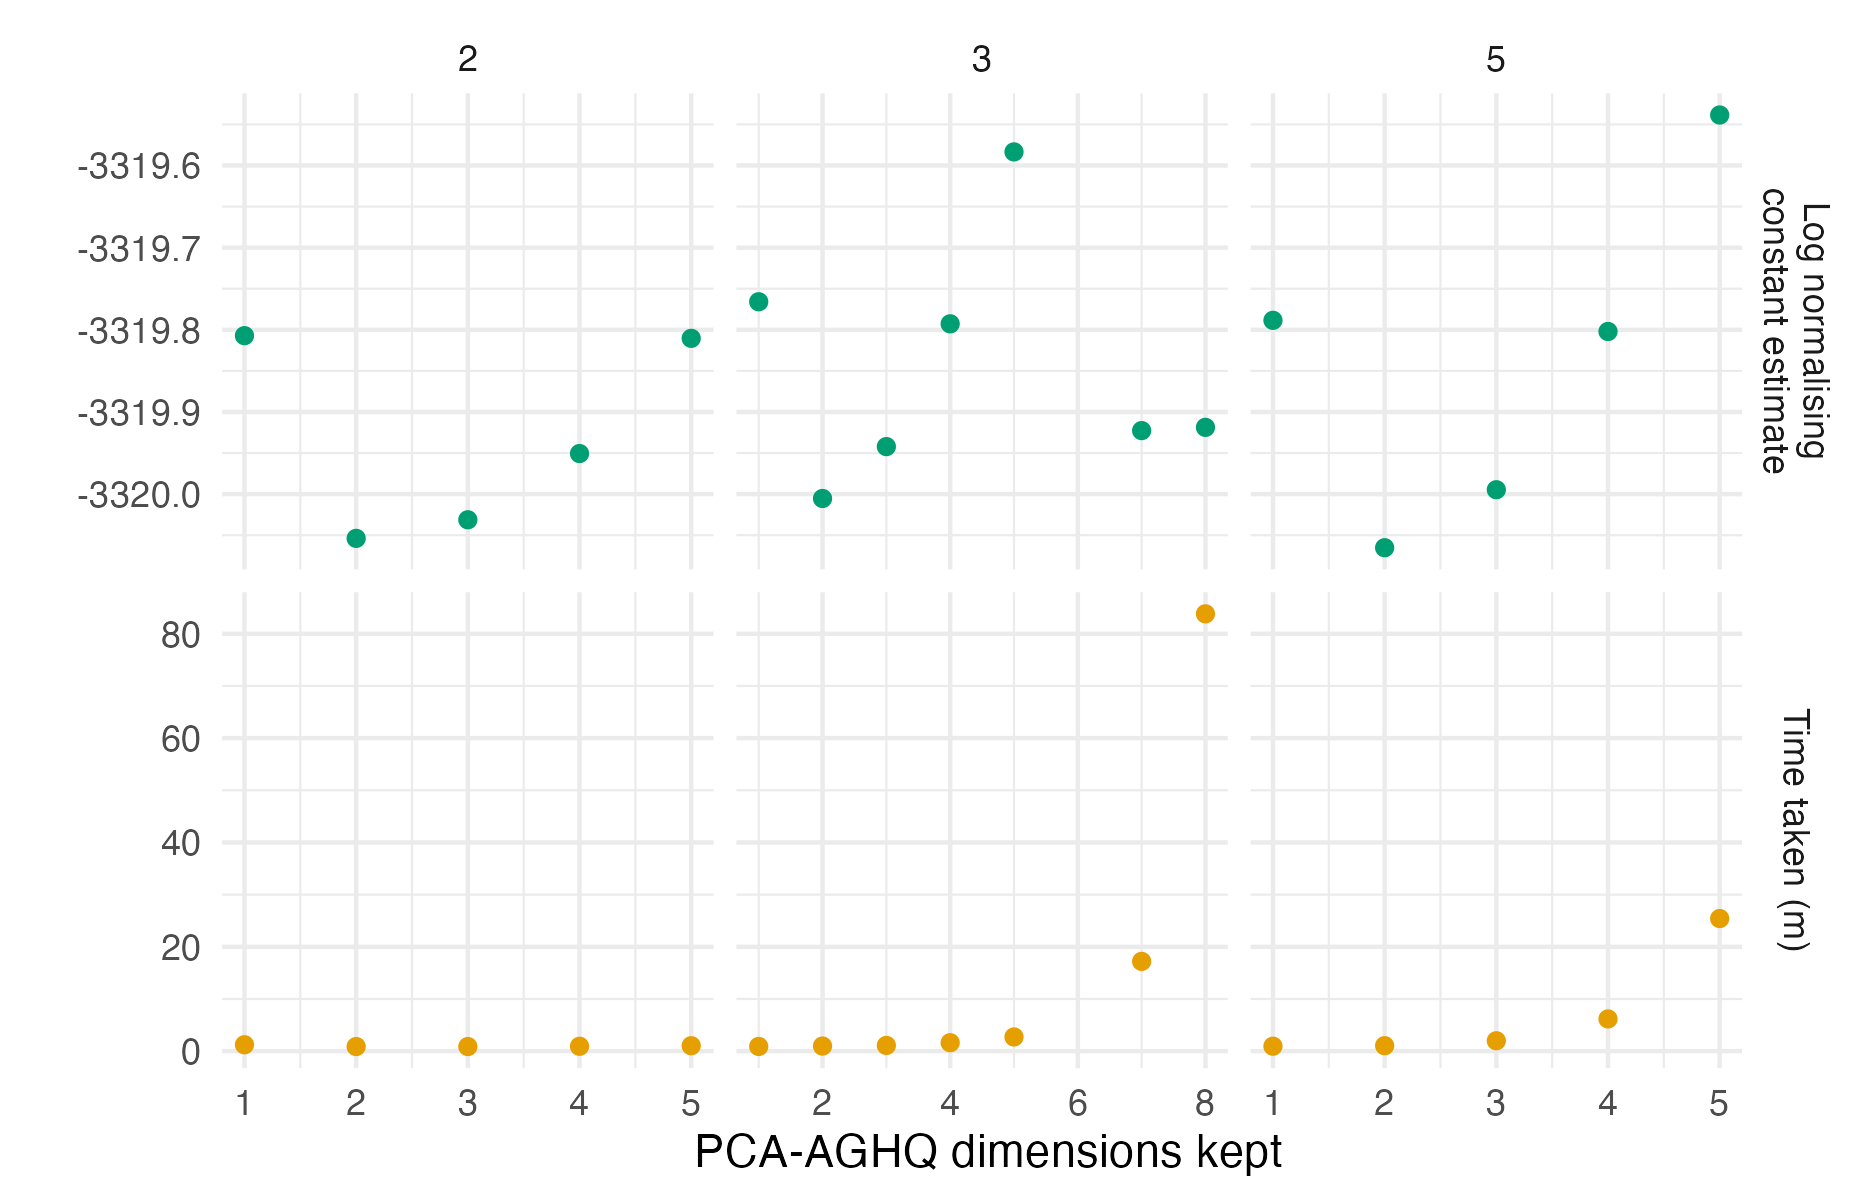 The logarithm of the normalising constant estimated using PCA-AGHQ and a range of possible values of \(k = 2, 3, 5\) and \(s \leq 8\). Using this range of settings, there was not convergence of the logarithm of the normalsing constant estimate. The time taken by GPCA-AGHQ increases exponentially with number of PCA-AGHQ dimensions kept.